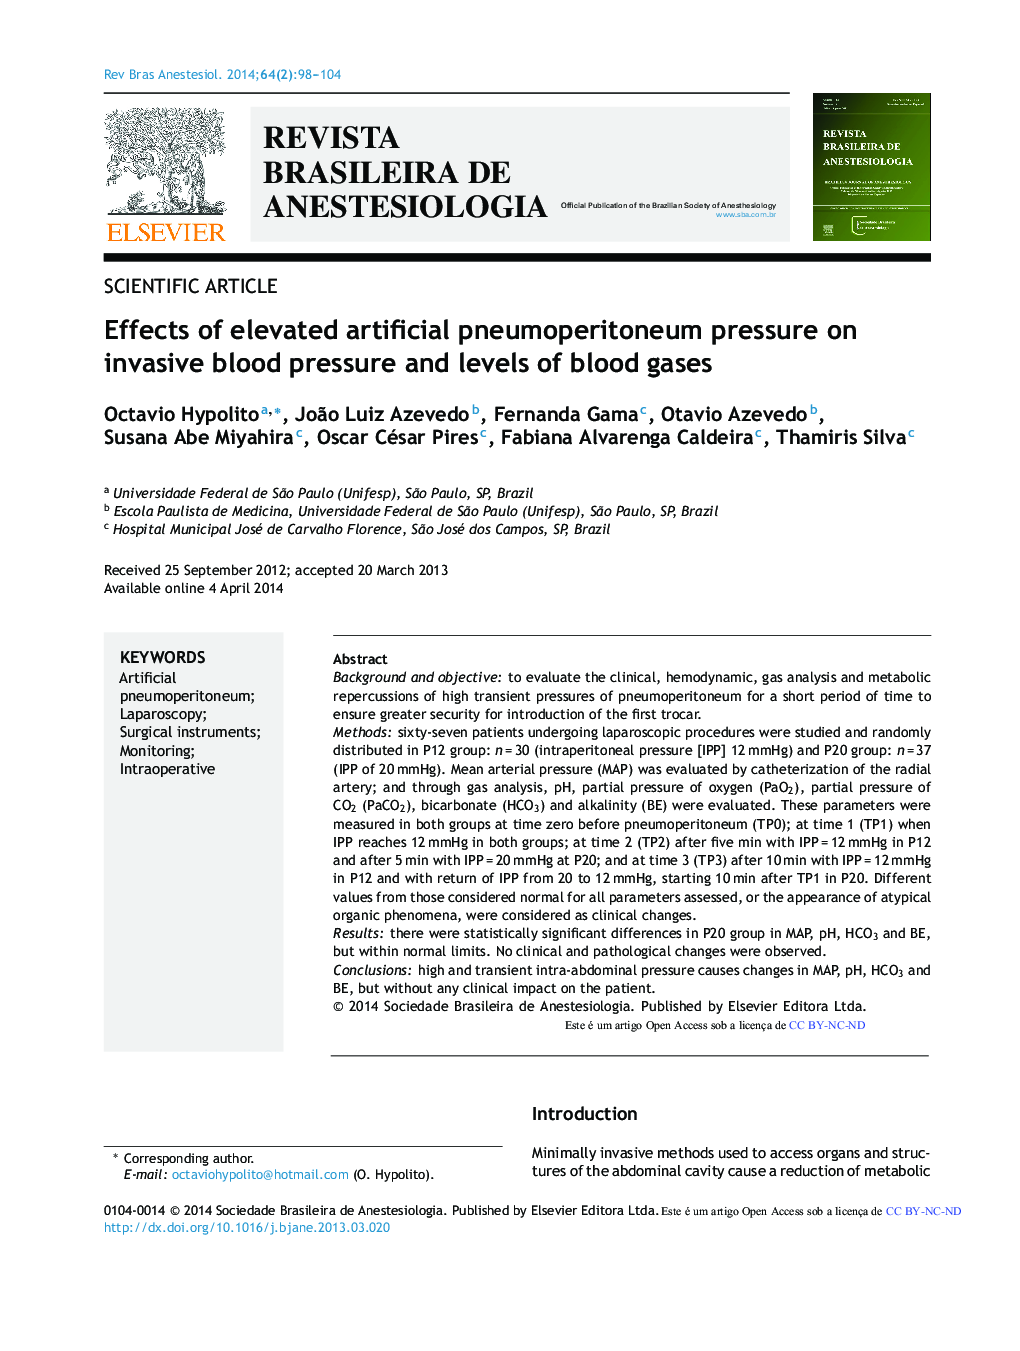 Effects of elevated artificial pneumoperitoneum pressure on invasive blood pressure and levels of blood gases